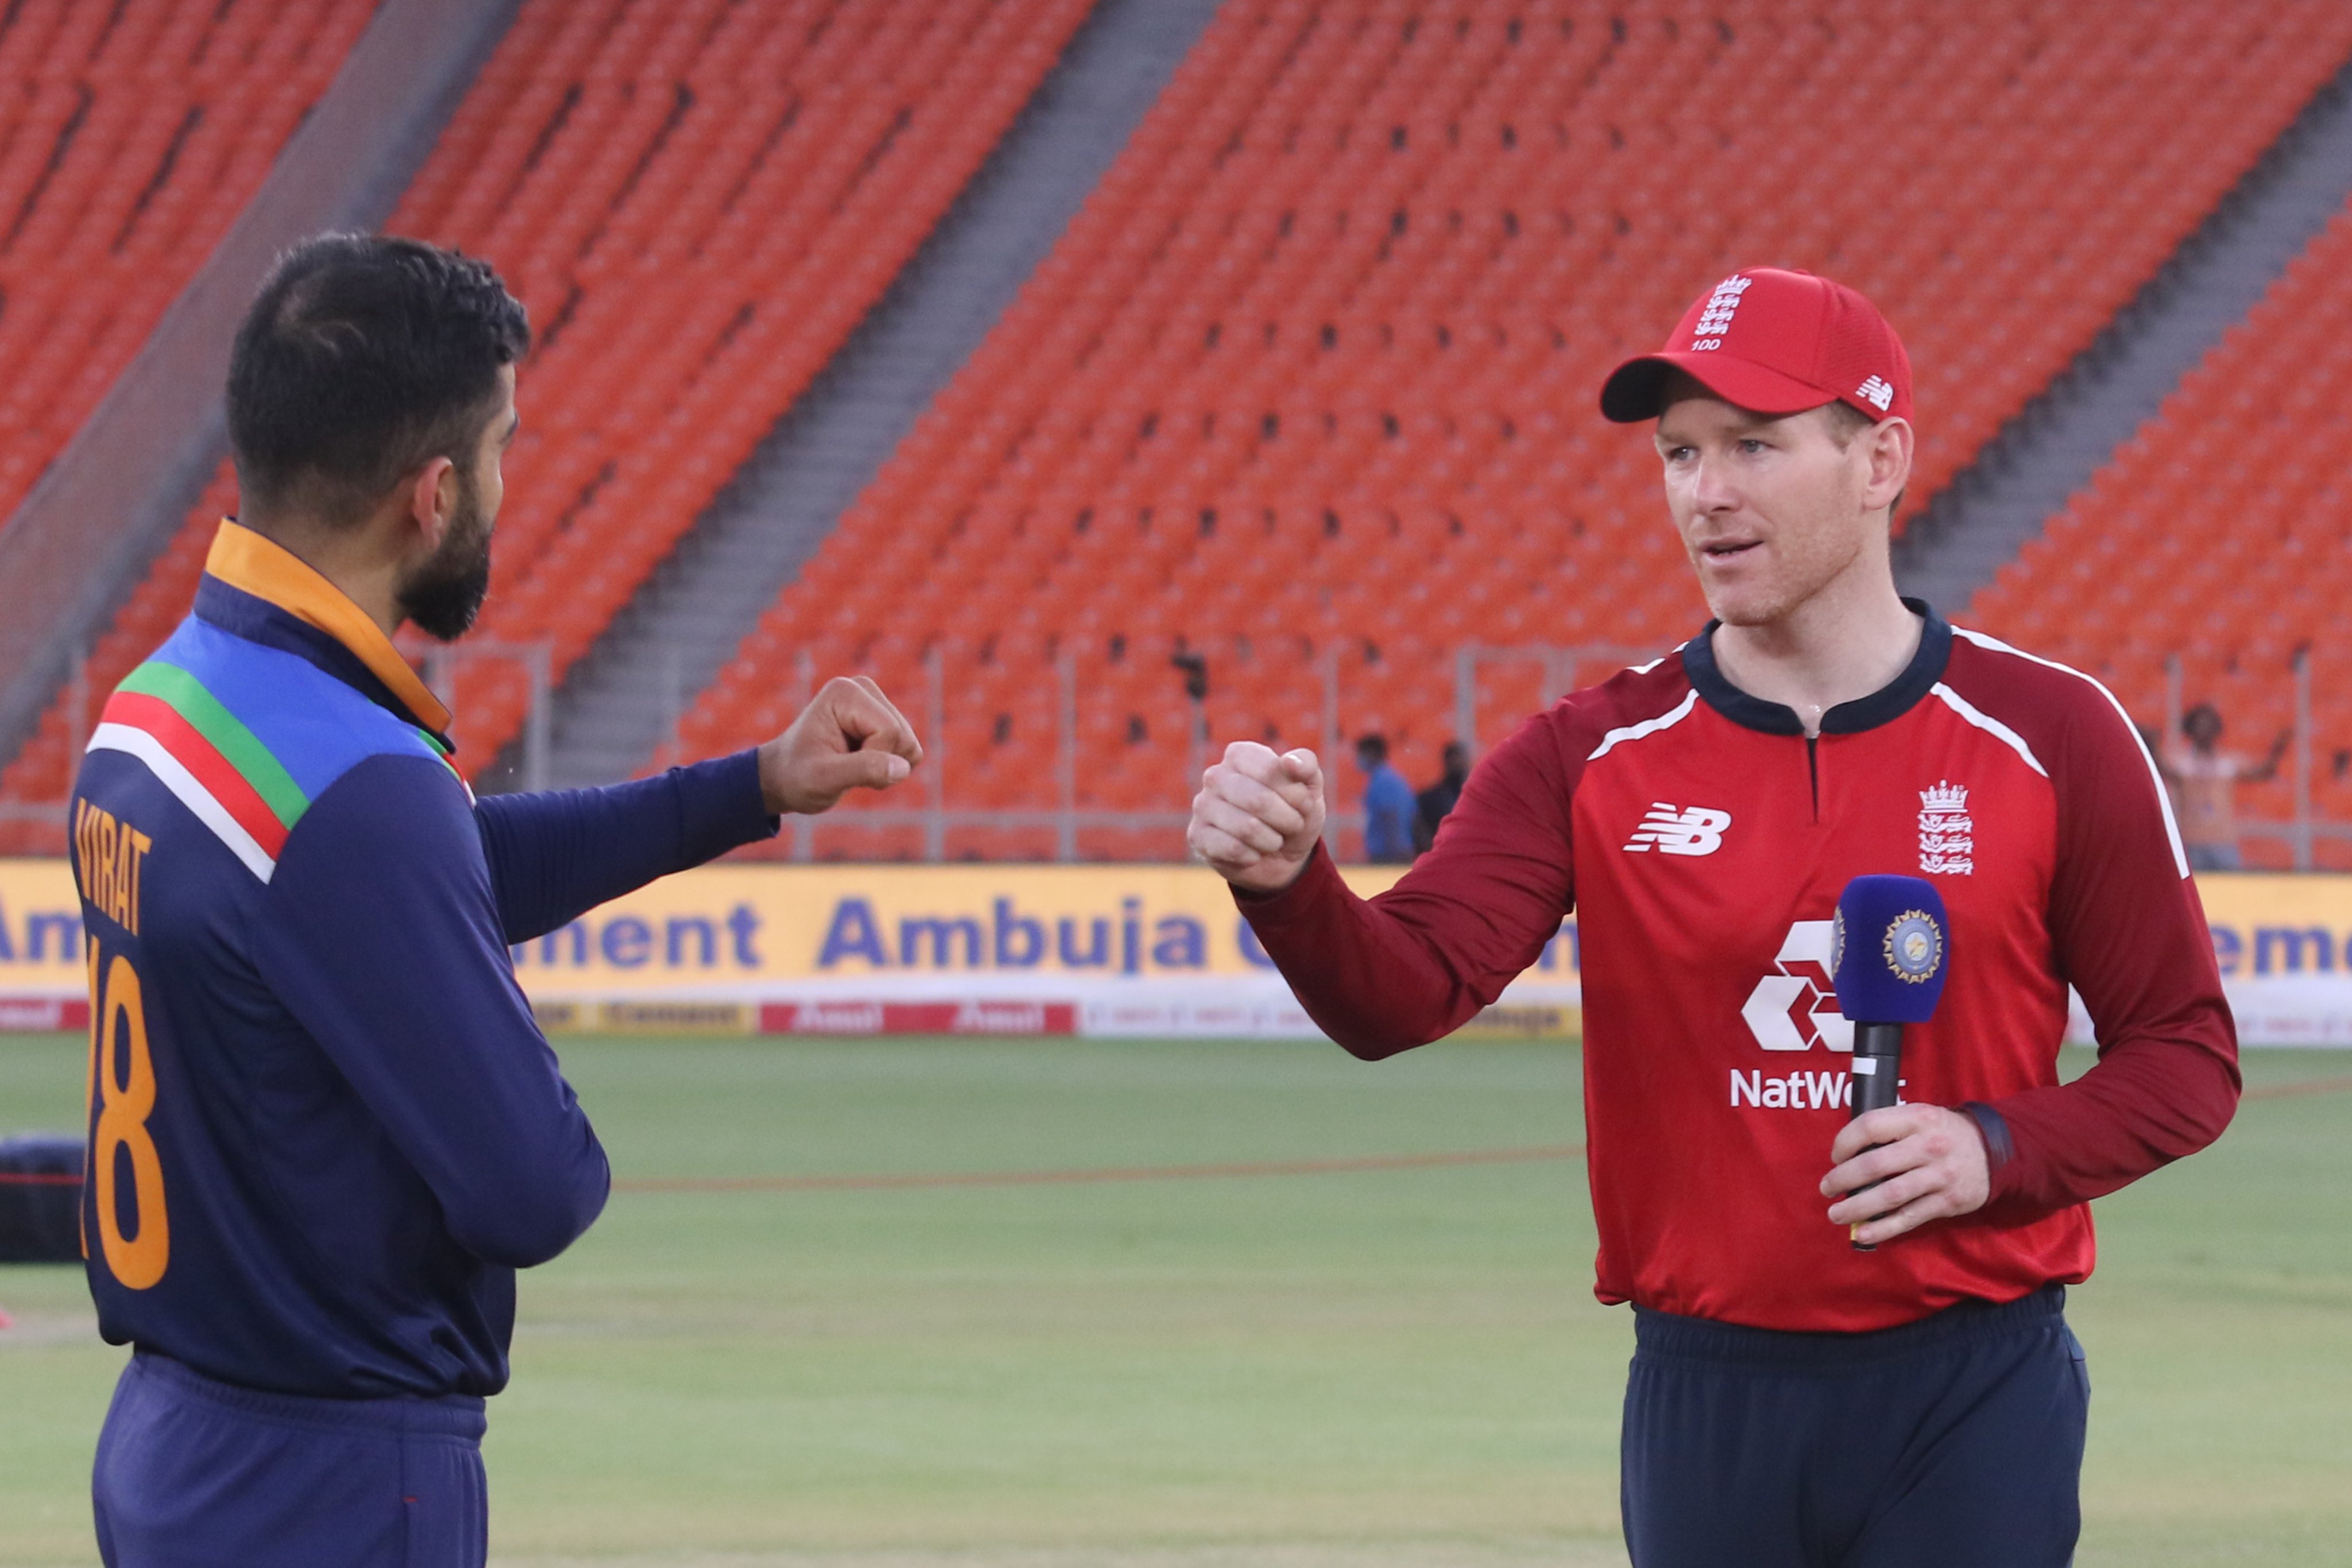 Why Eoin Morgan wearing two caps during the T20Is against India?